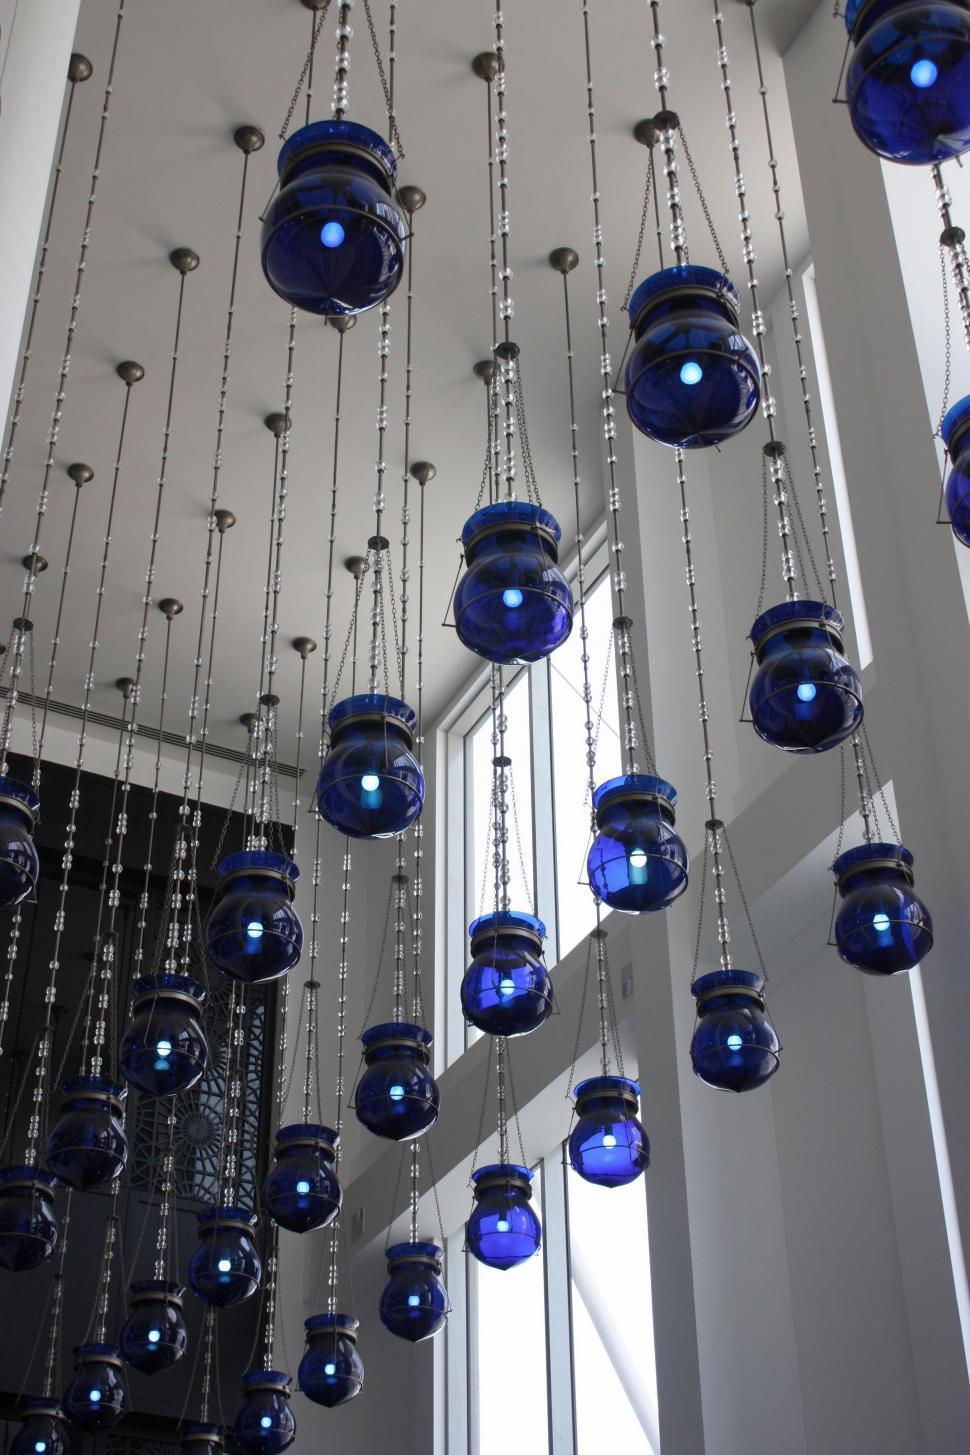 Free Image of Blue Balls Hanging From Ceiling 